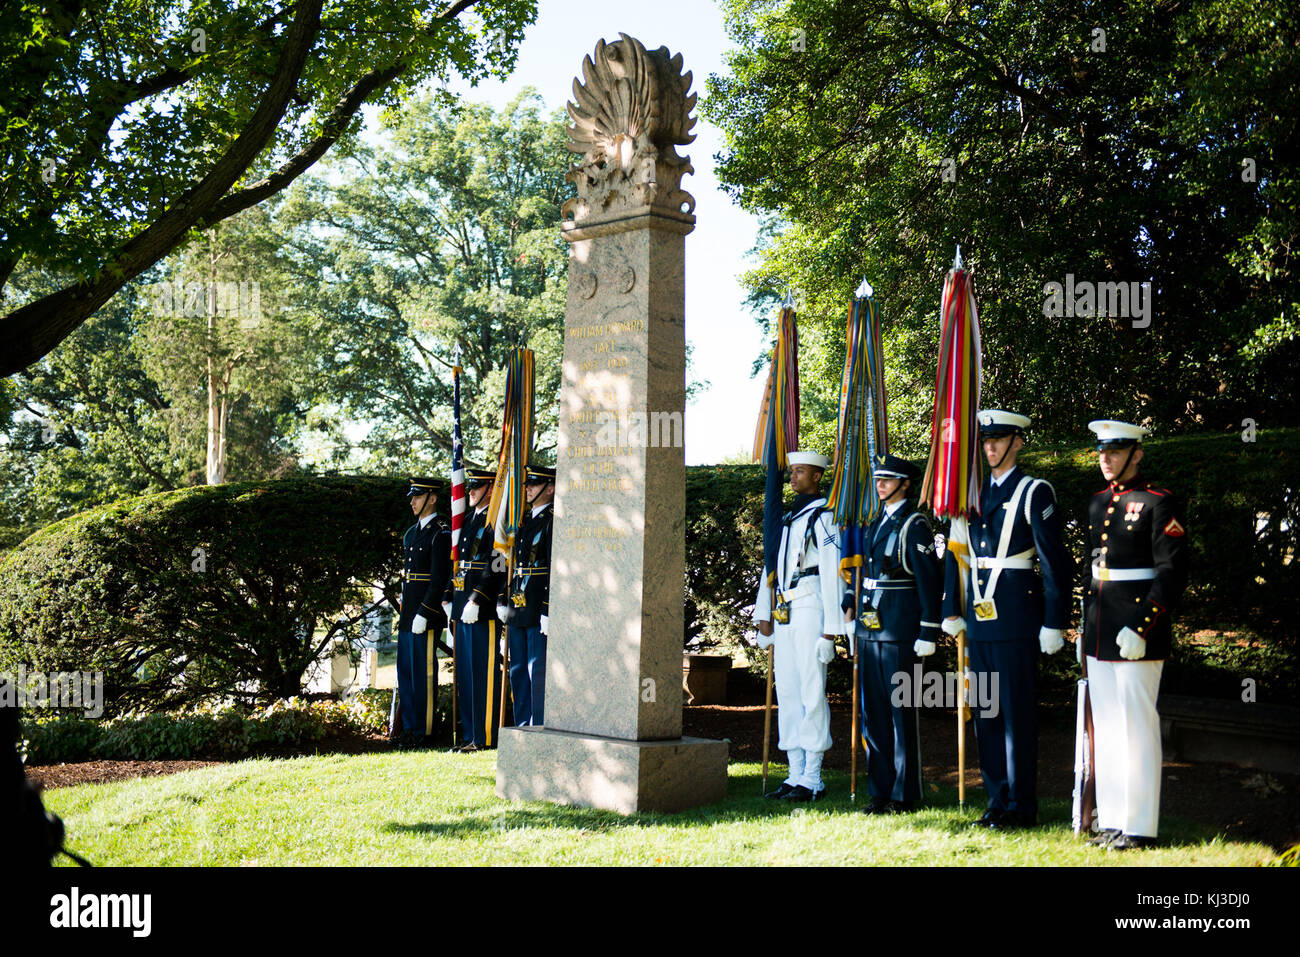 The U.S. Army Military District of Washington conducts a Presidential Armed Forces Full Honor Wreath-Laying Ceremony at the grave of President William H. Taft in Arlington National Cemetery to celebrate his 158th birt 0102 Stock Photo